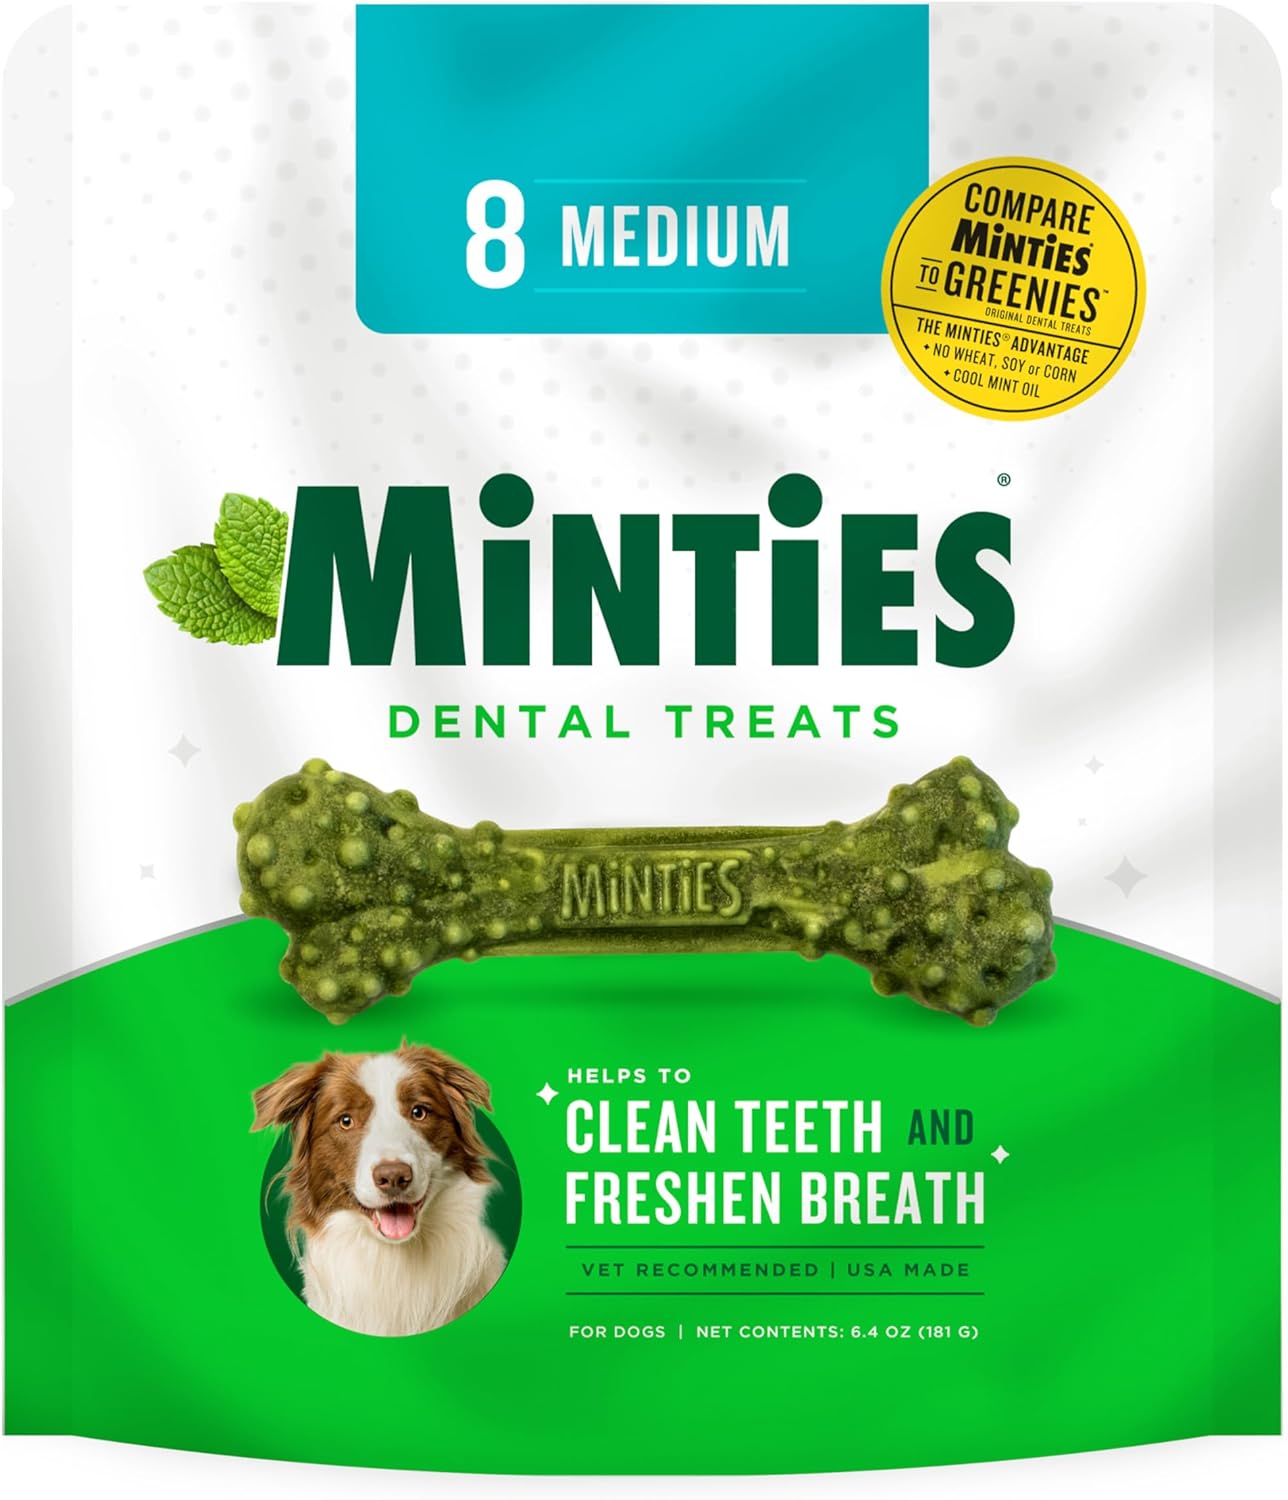 Minties Dental Chews for Dogs, 8 Count, Vet-Recommended Mint-Flavored Dental Treats for Medium Dogs 25-50 lbs, Dental Bones Clean Teeth, Fight Bad Breath, and Removes Plaque and Tartar